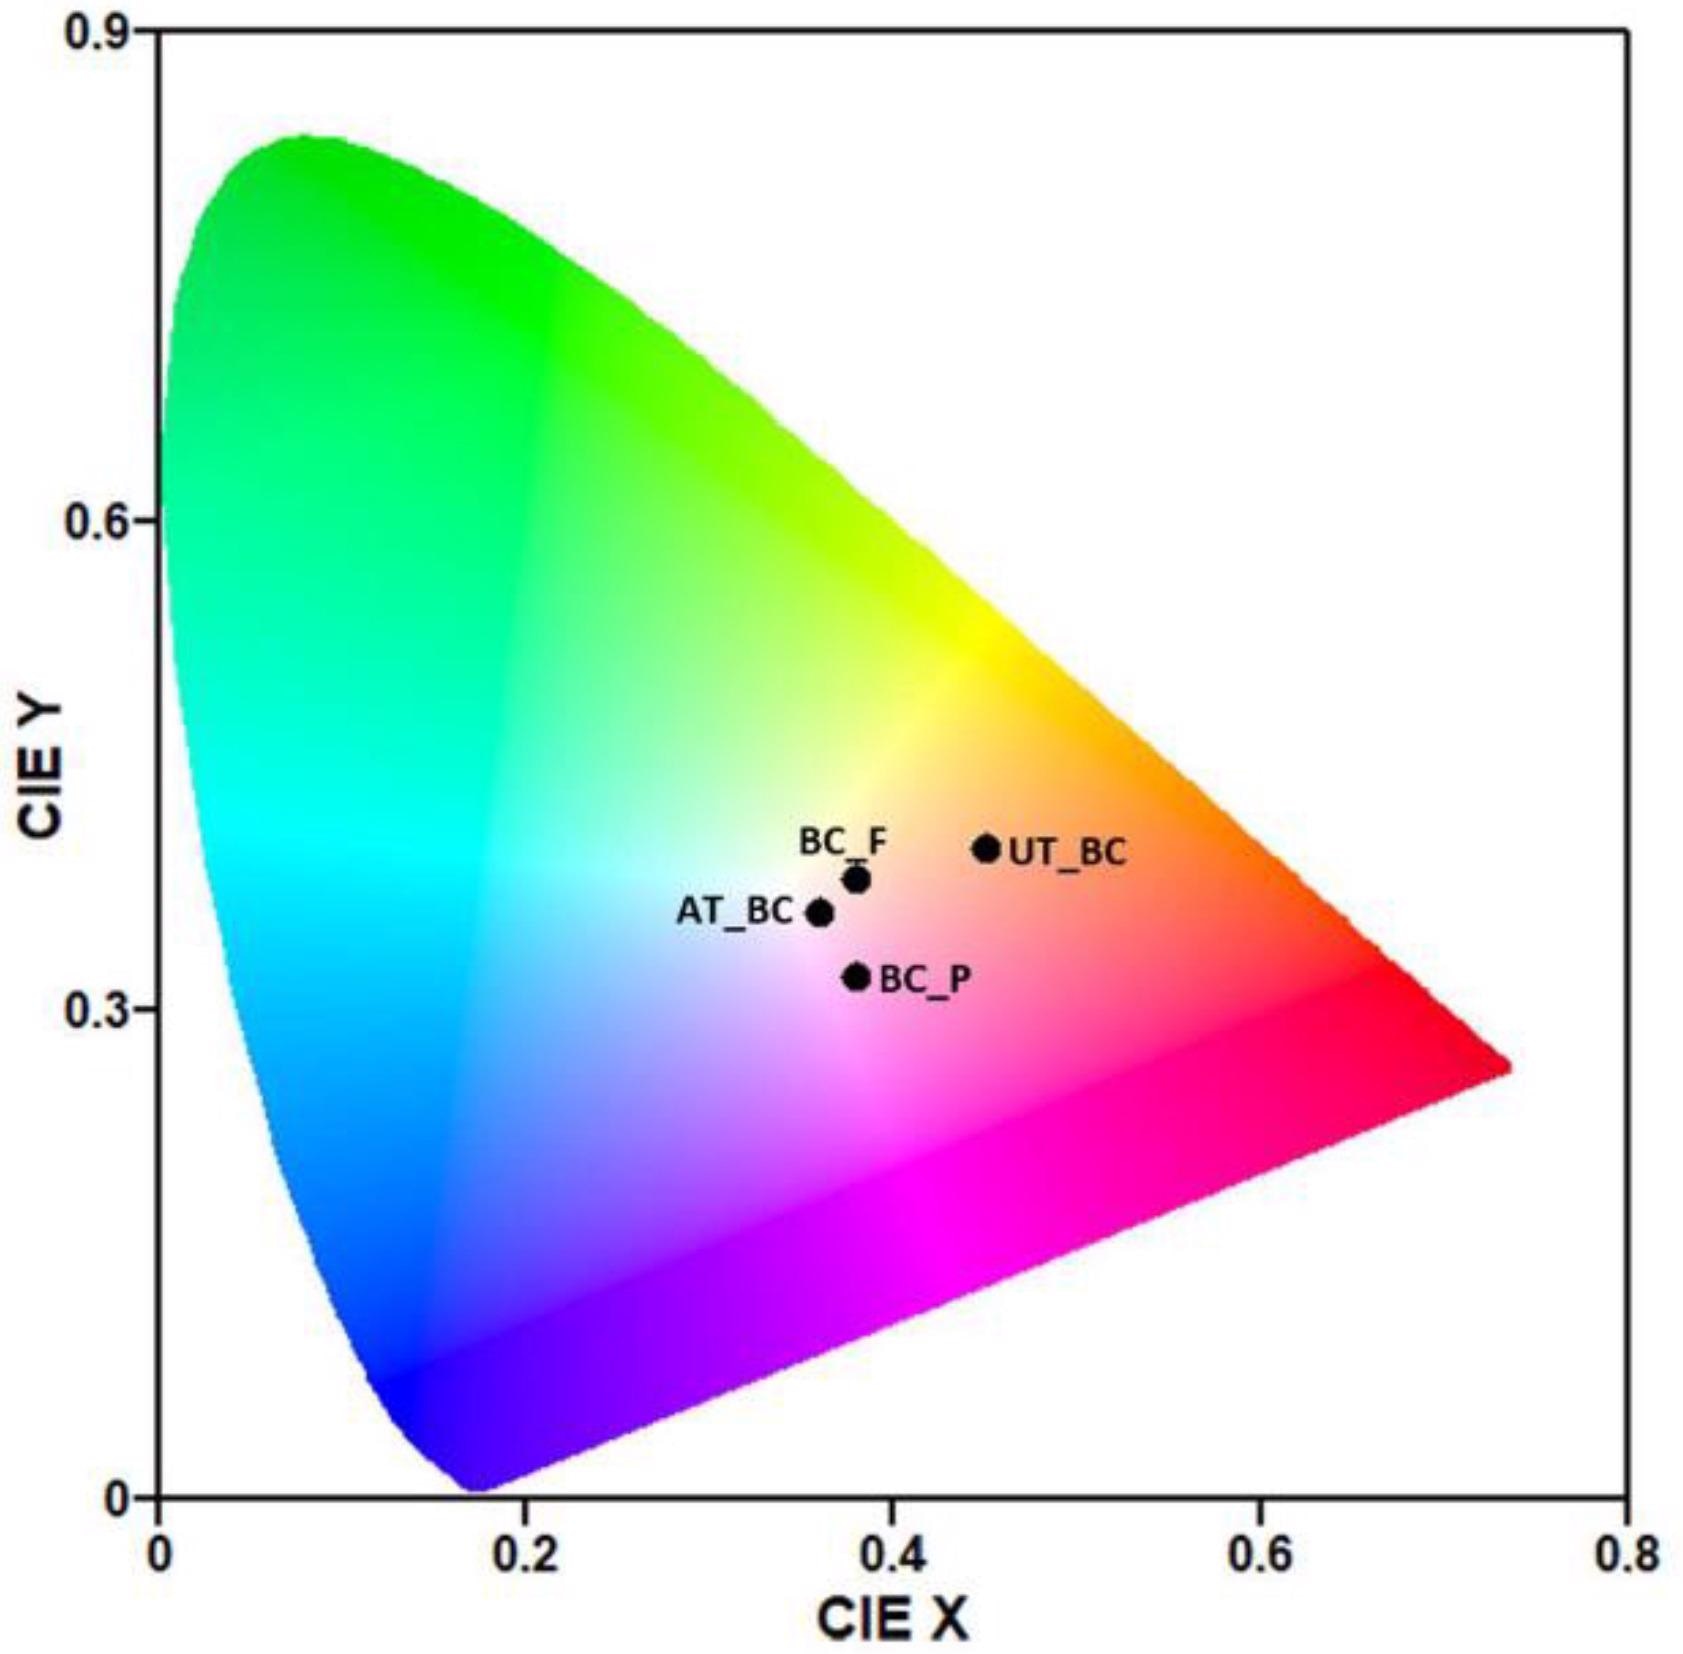 CIE Chromaticity diagram obtained using GOCIE software [42], from the sample’s spectra provided by Datacolor 110 spectrophotometer. The diagram allows the perception of the samples color from the distributions of wavelengths in the electromagnetic visible spectrum.